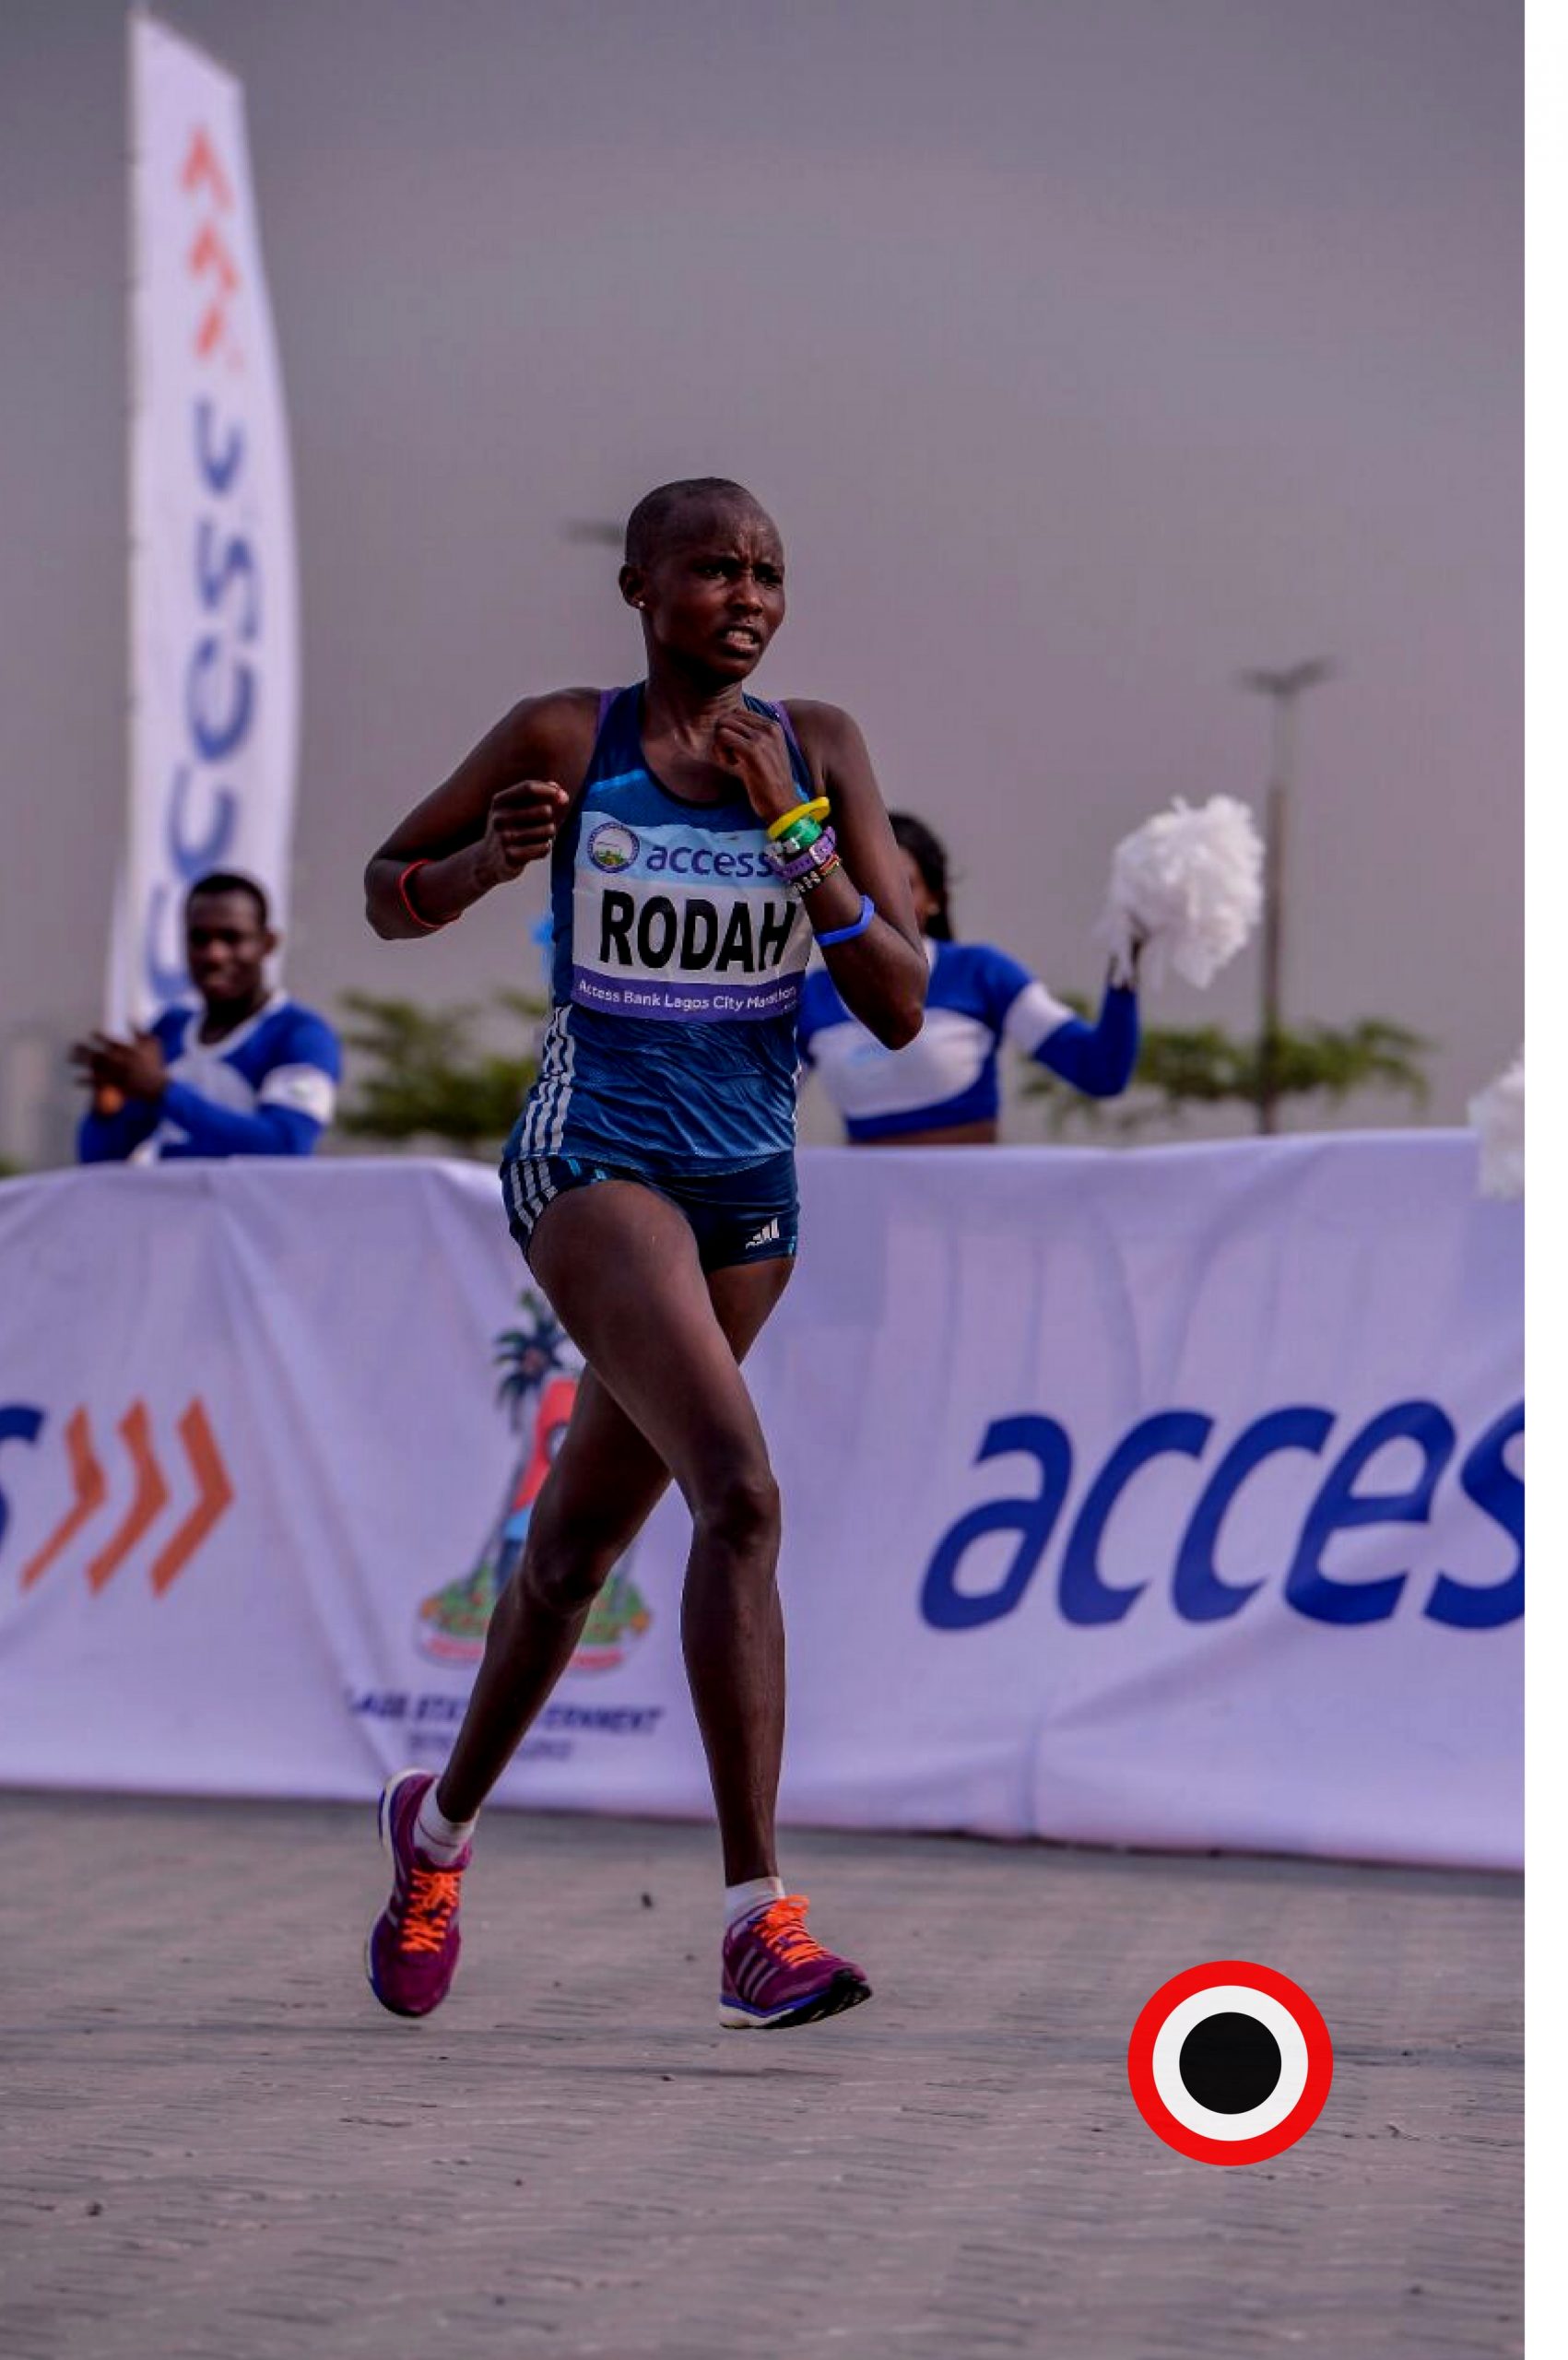 Access Bank support of marathon to boost tourism, GDP